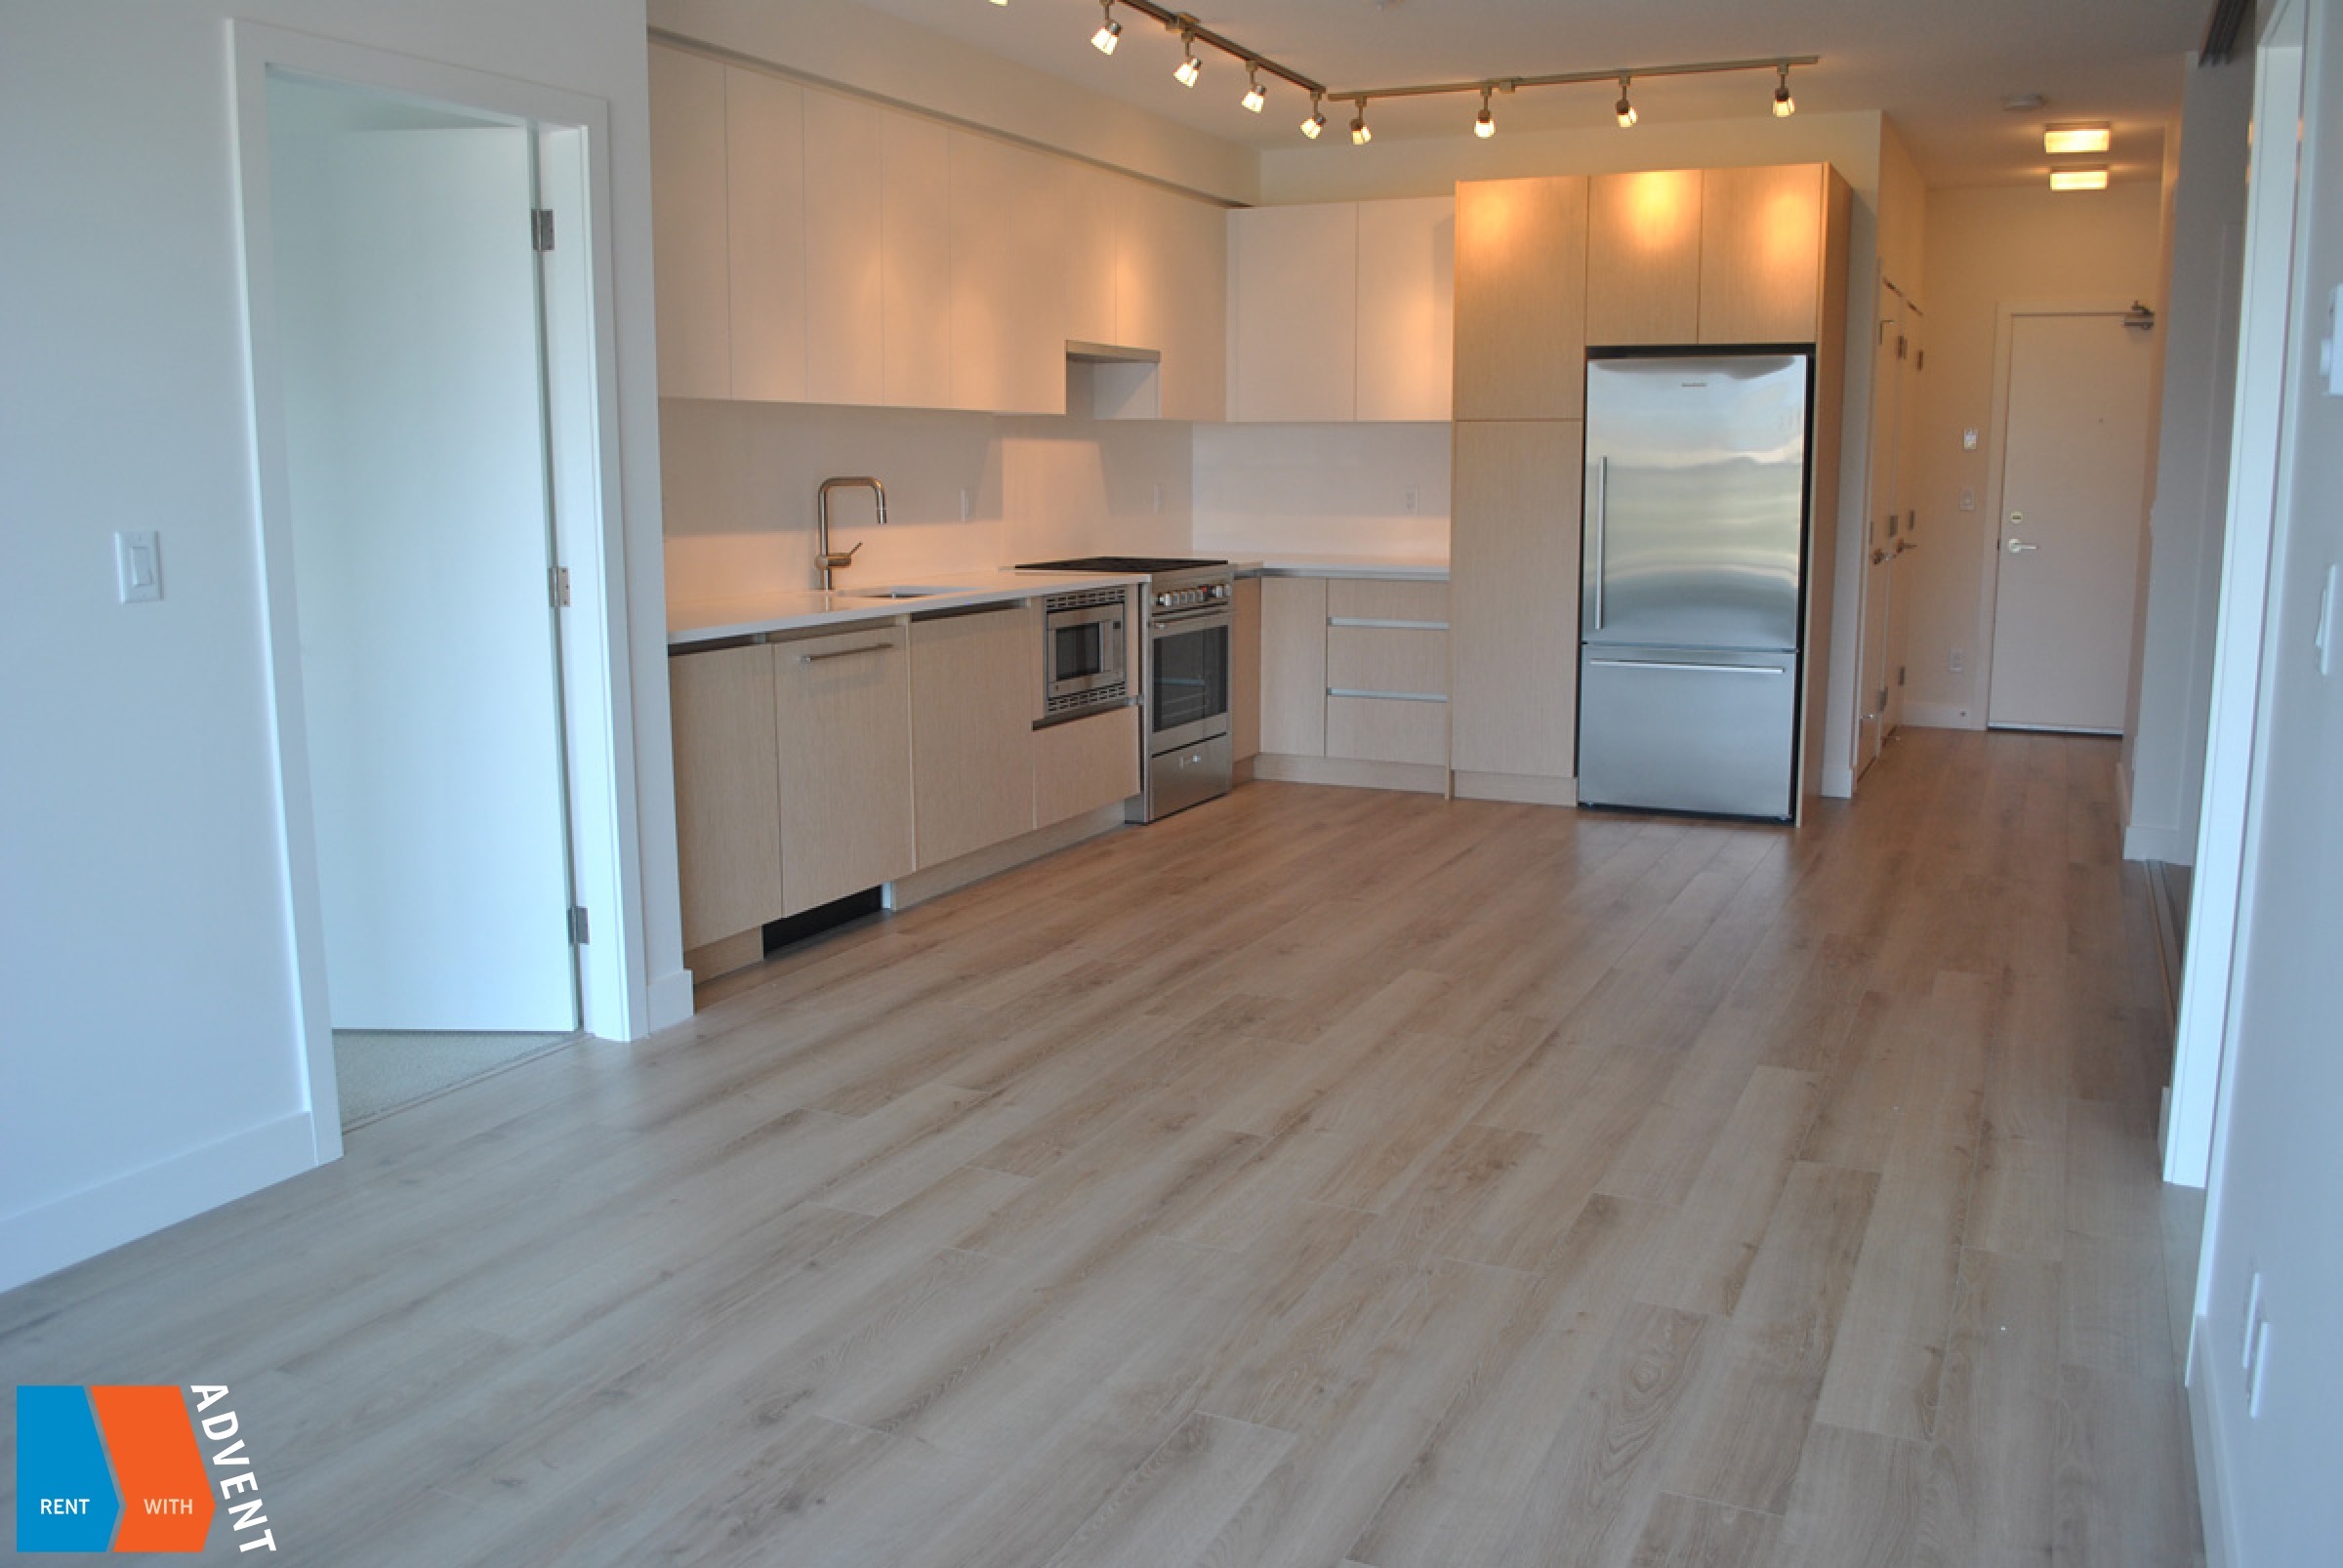 Modern 4th Floor 2 Bed & Den Luxury Apartment Rental at The Oxford in East Vancouver. 407 - 2141 East Hastings, Vancouver, BC, Canada.